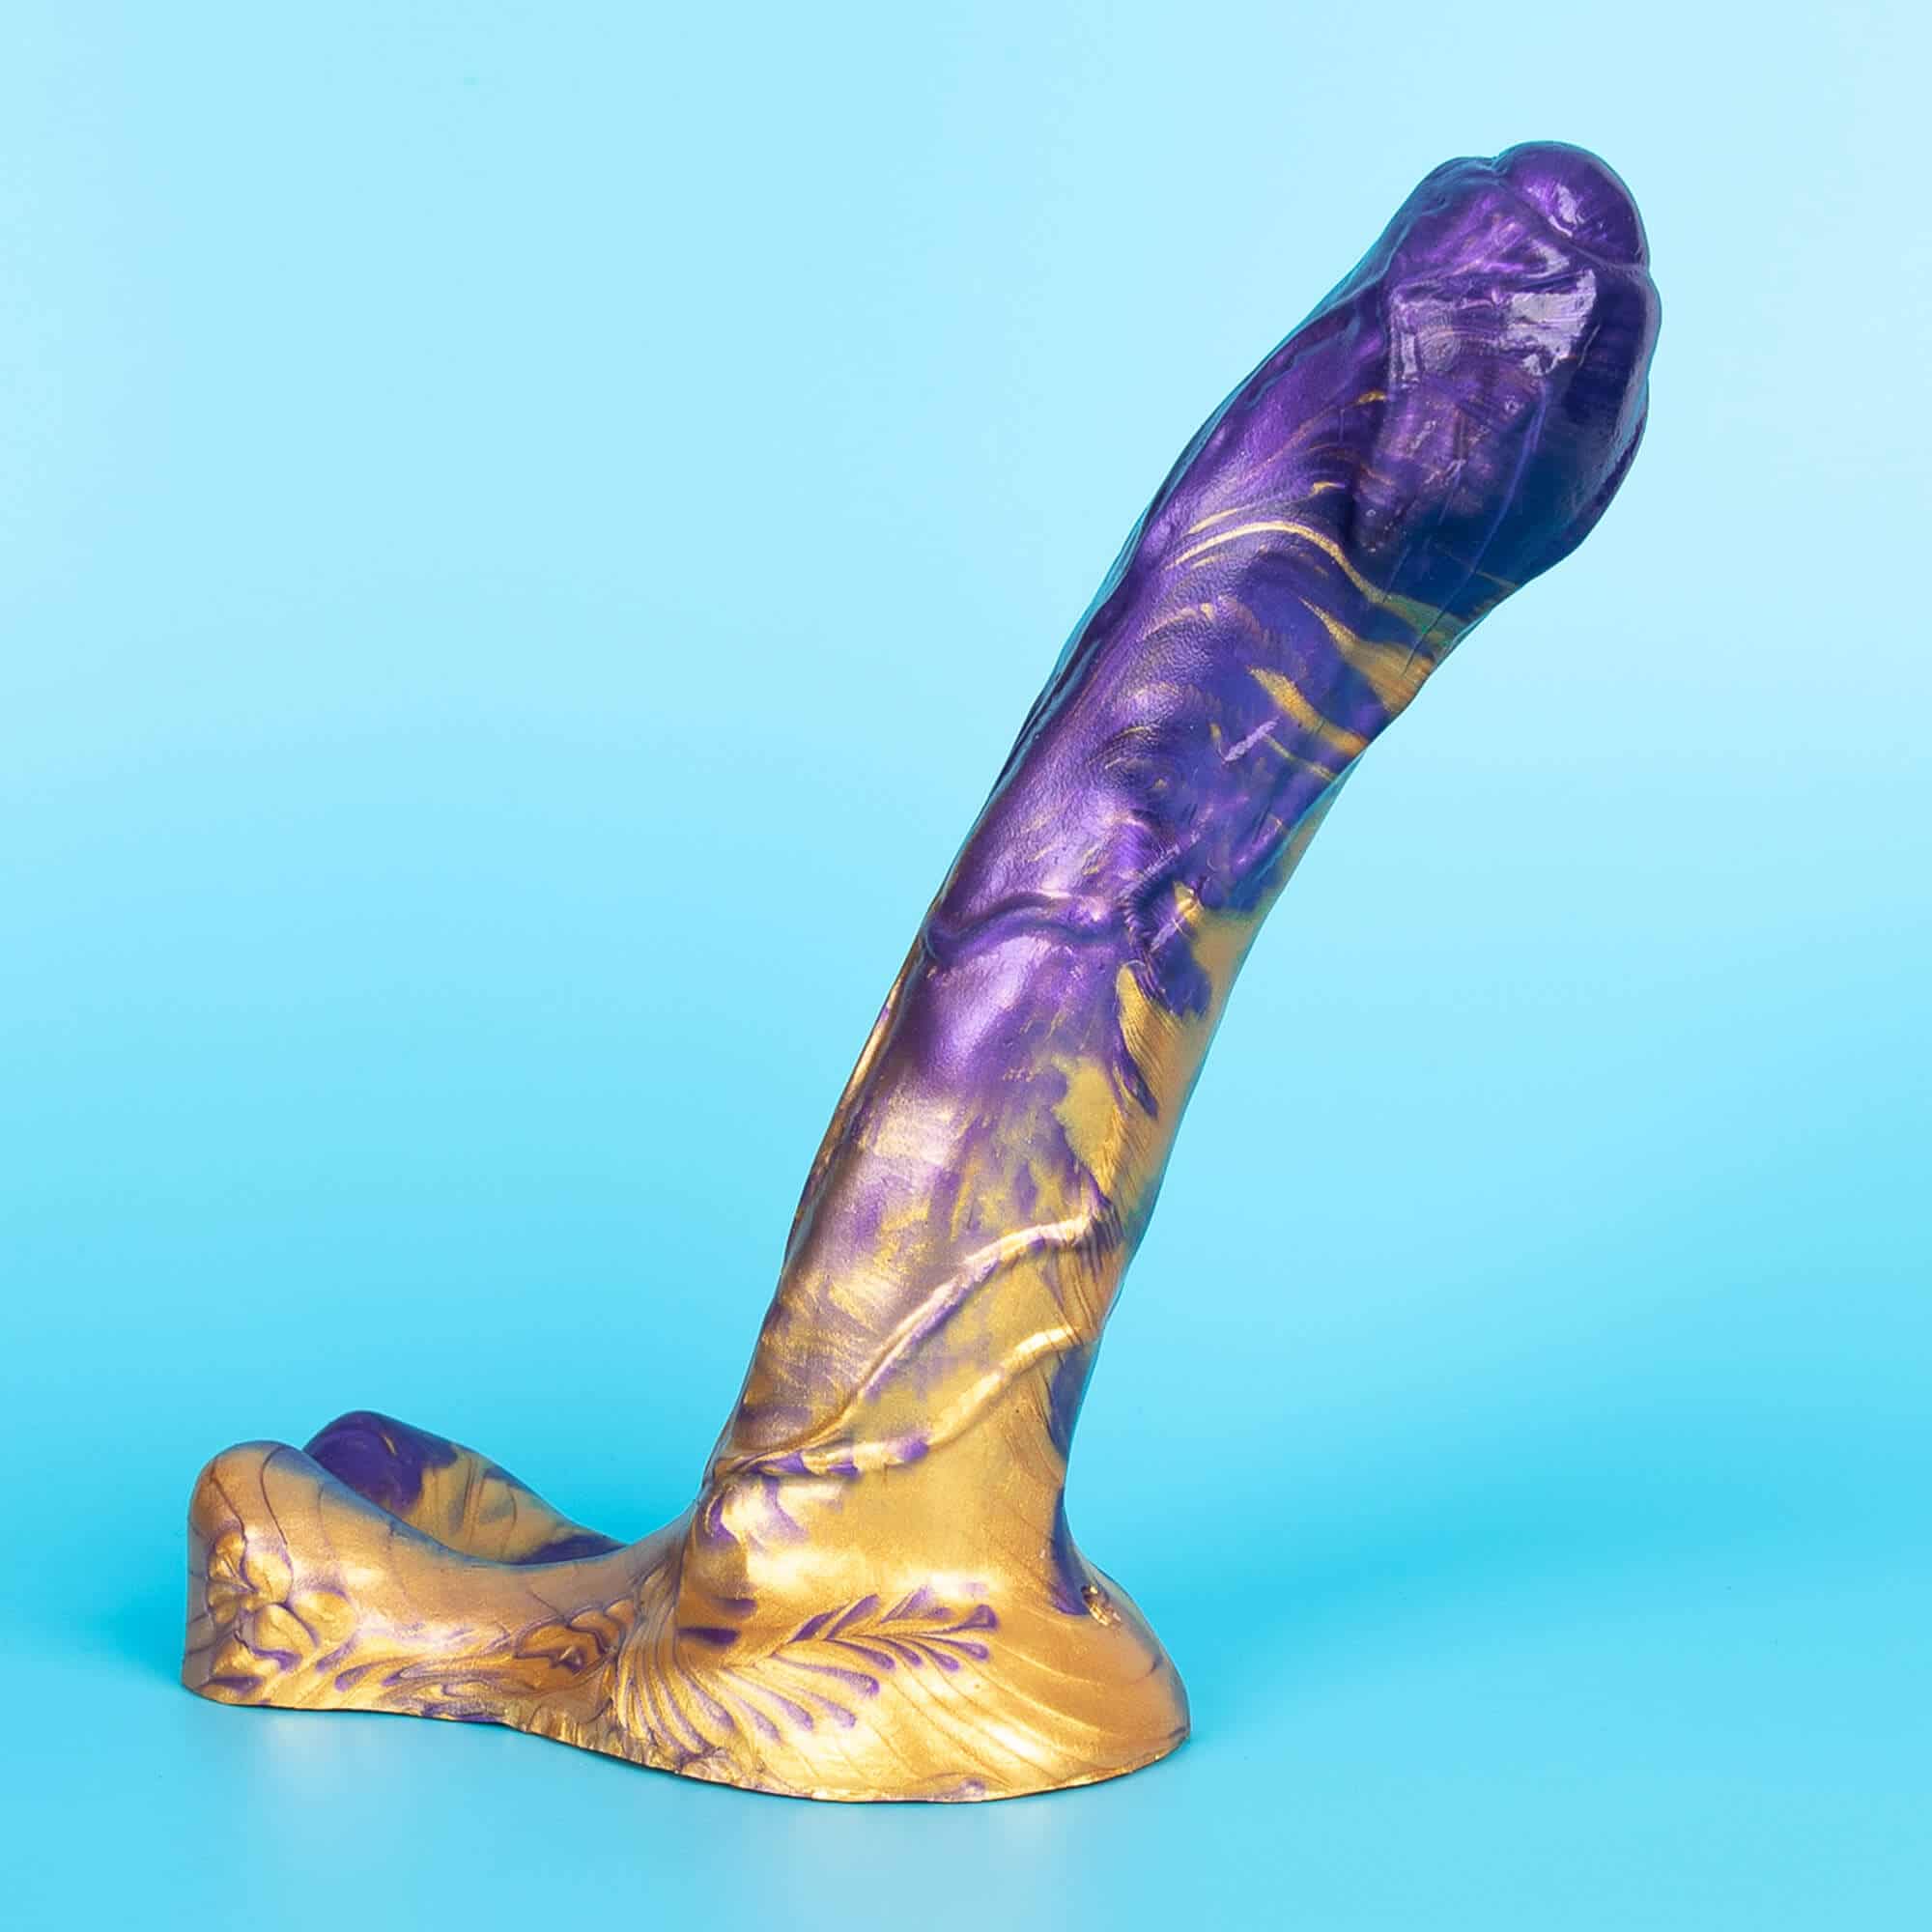 The Hercules dildo is a realistic design.